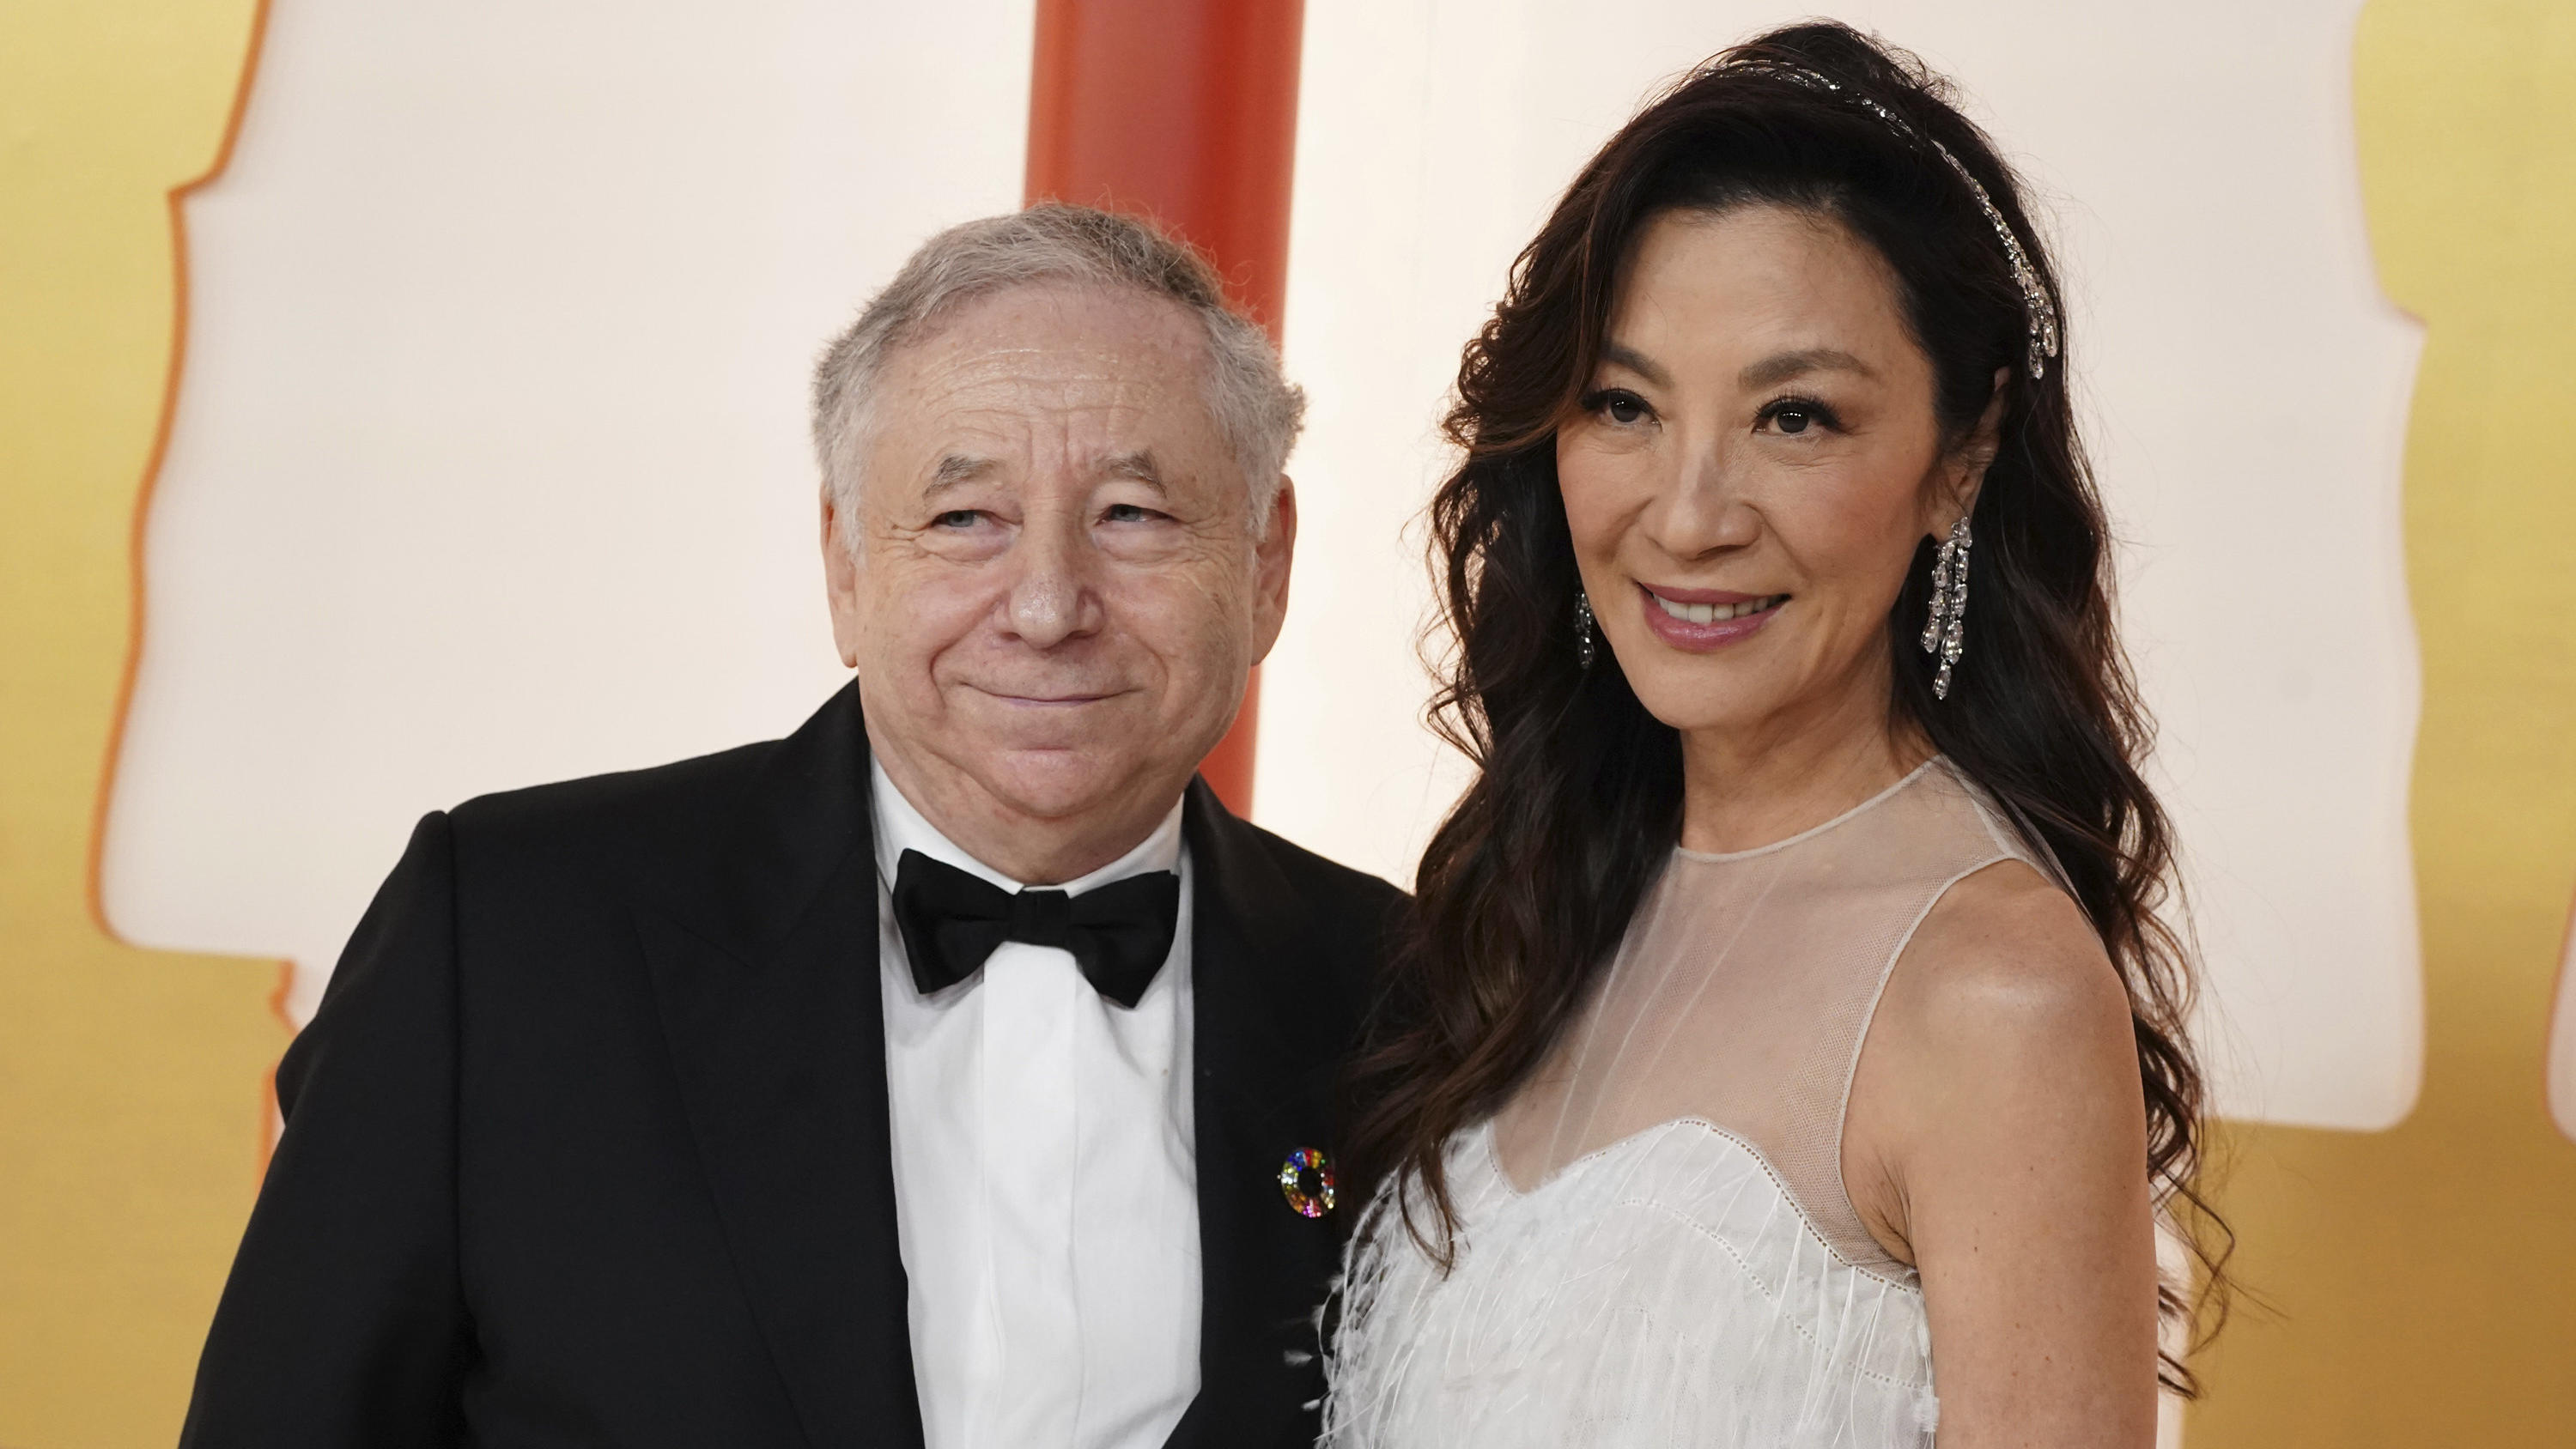 Jean Todt, left and Michelle Yeoh arrive at the Oscars on Sunday, March 12, 2023, at the Dolby Theatre in Los Angeles. (Photo by Jordan Strauss/Invision/AP)